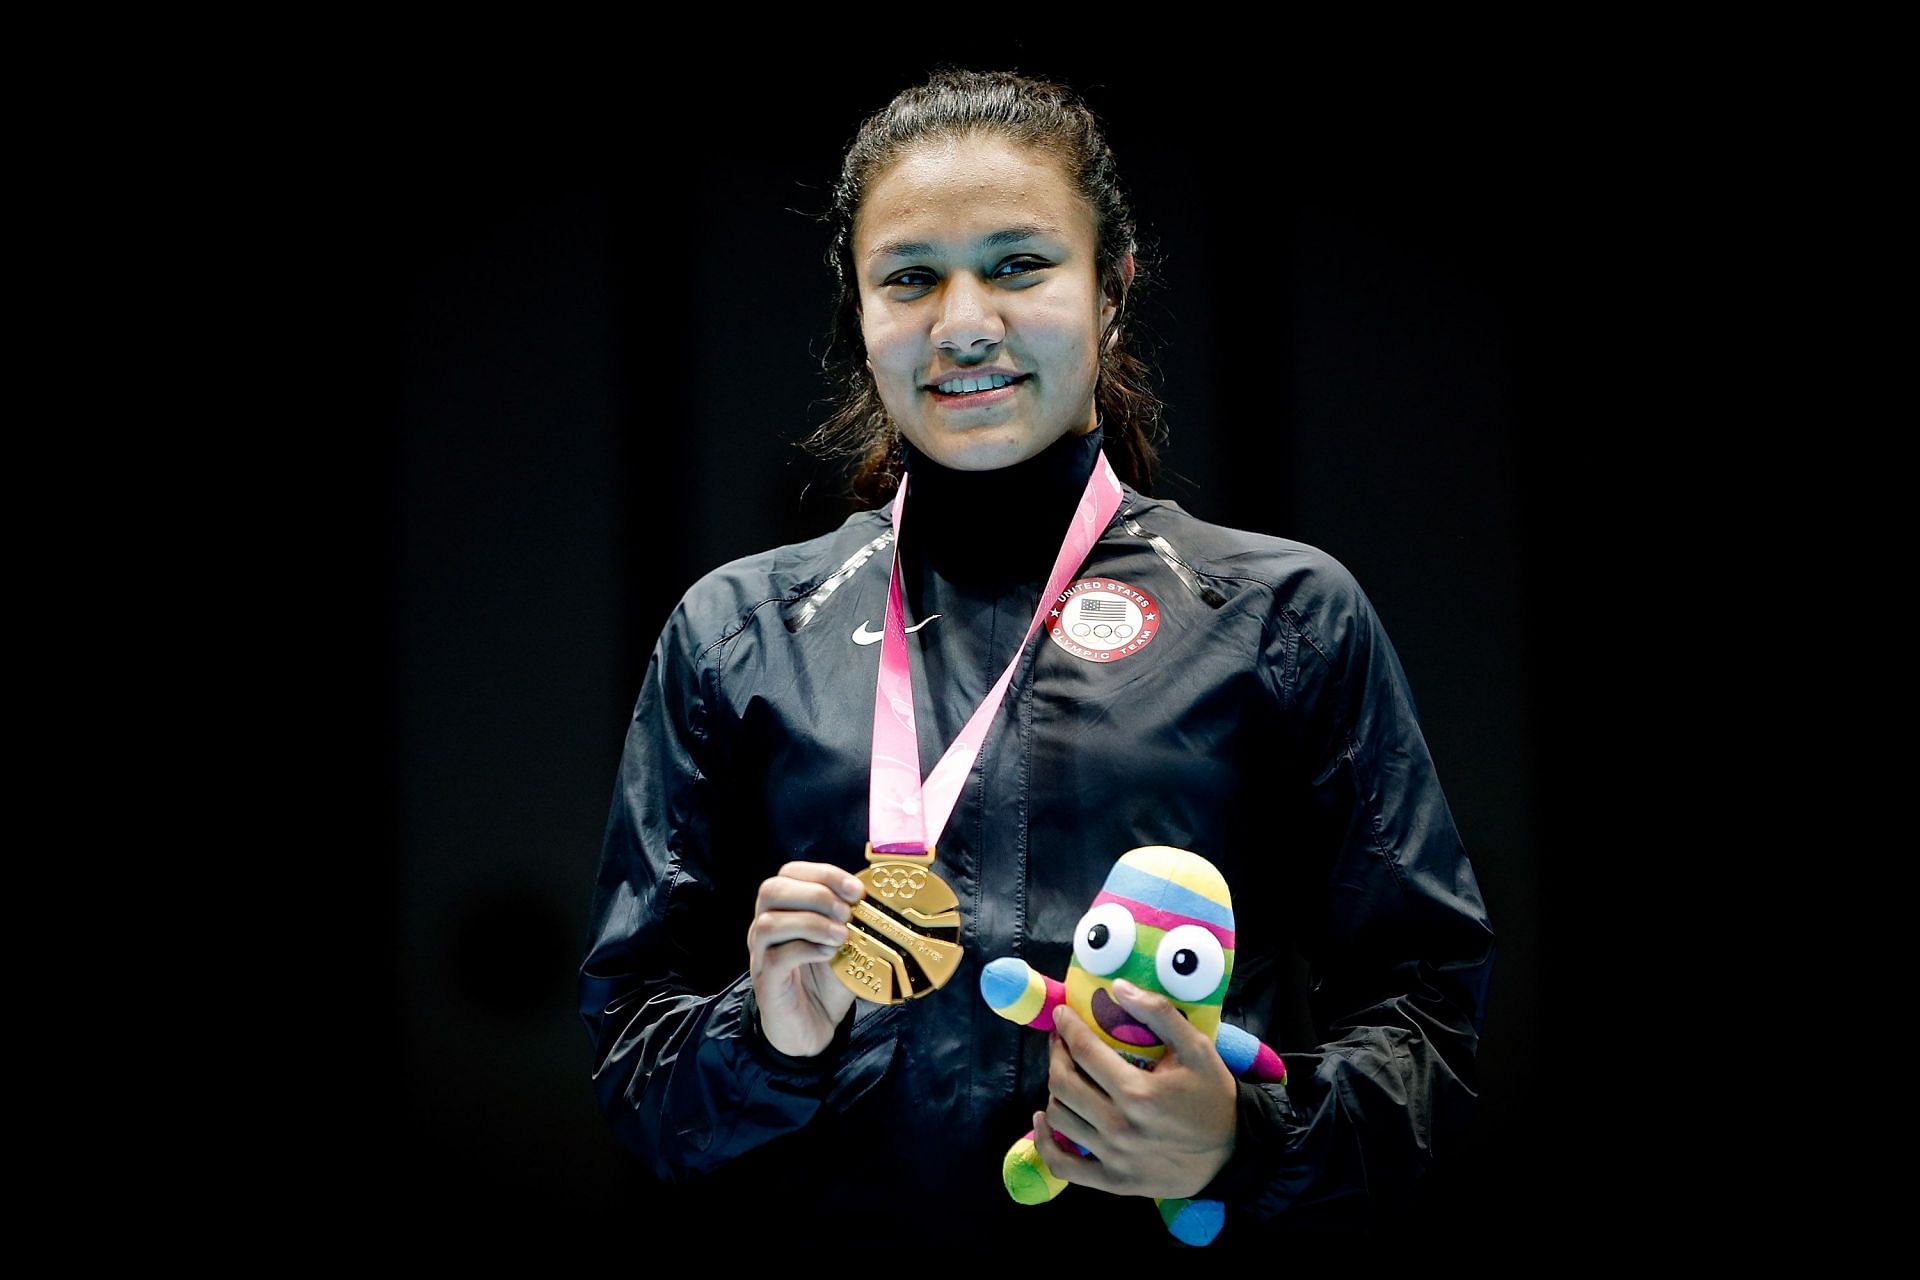 2014 Summer Youth Olympic Games - Day 10